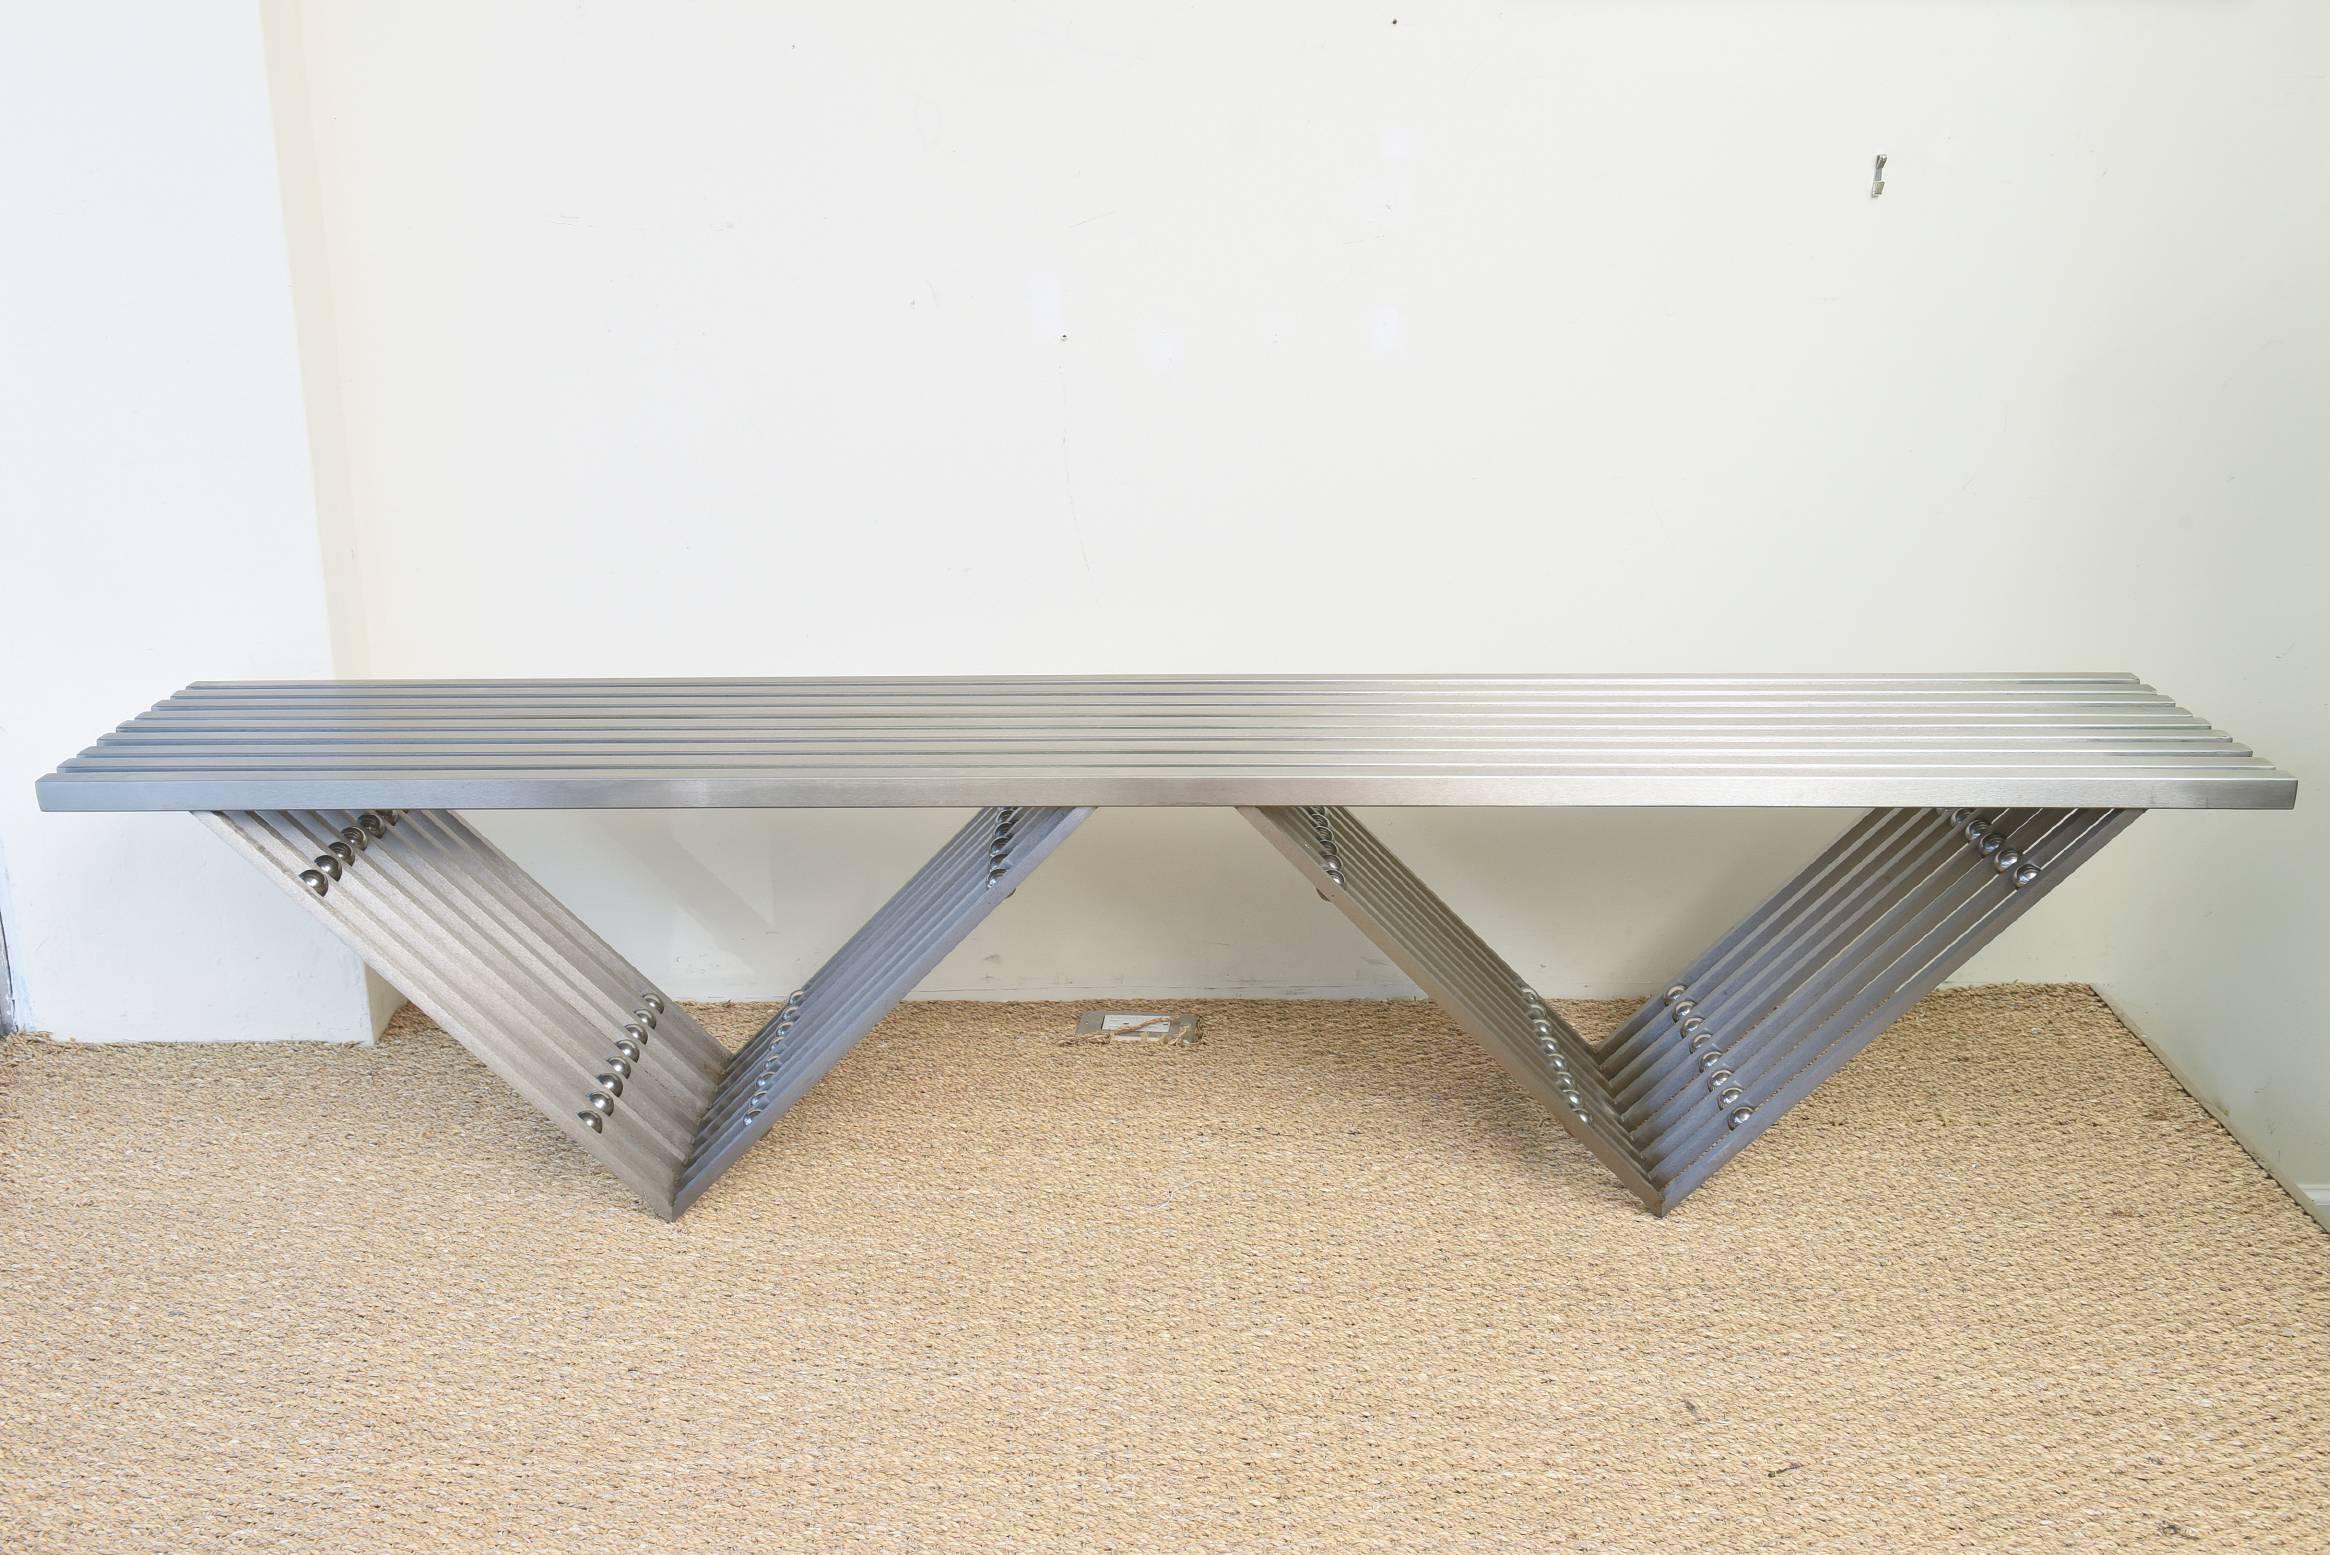 This fantastic signed limited edition sculptural bench by Glen Mayo is entitled the